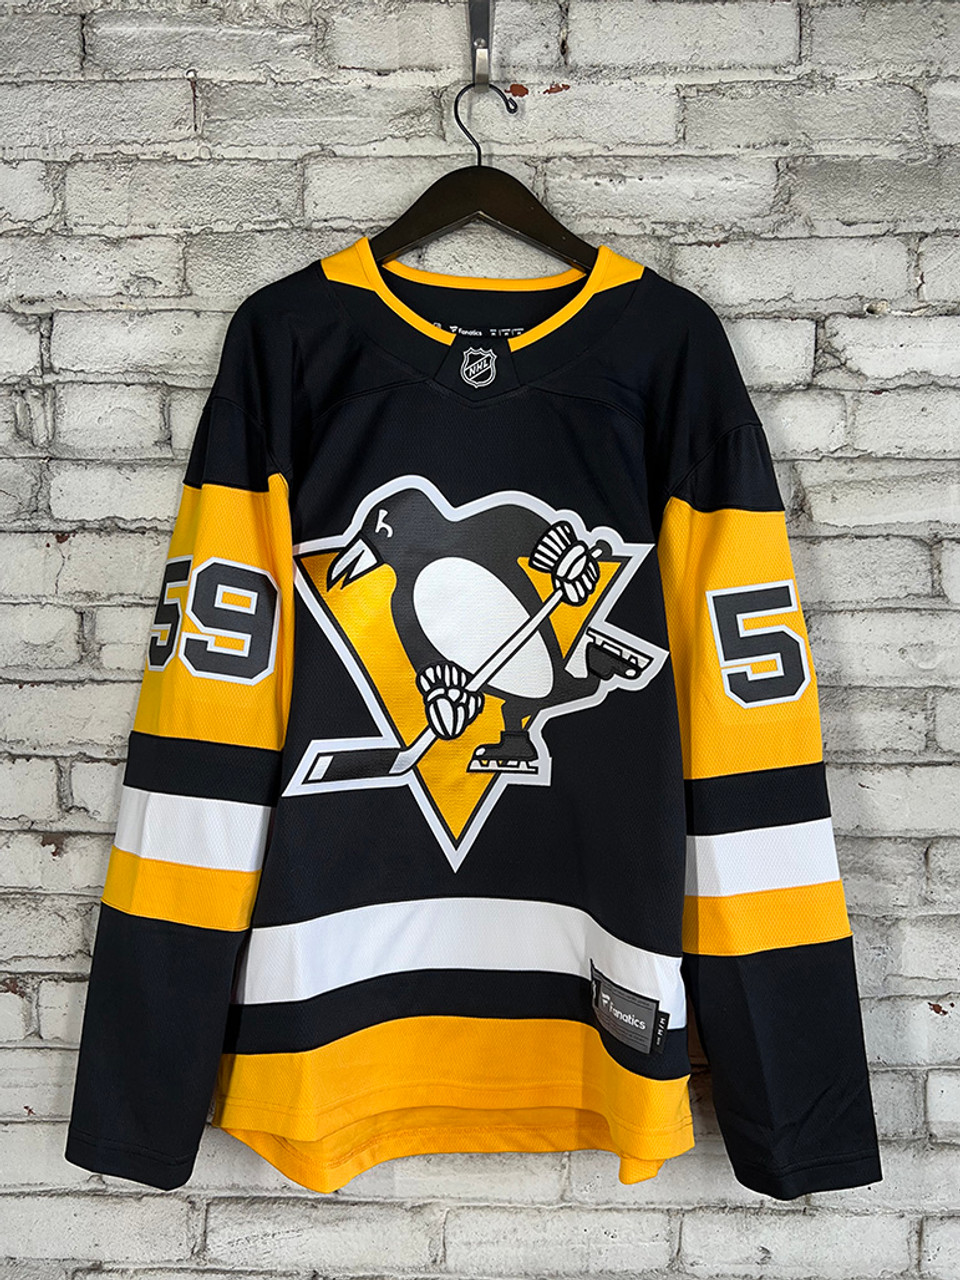 #87 Crosby - Fanatics NHL Official Pittsburgh Penguins Captain Jersey  (White)